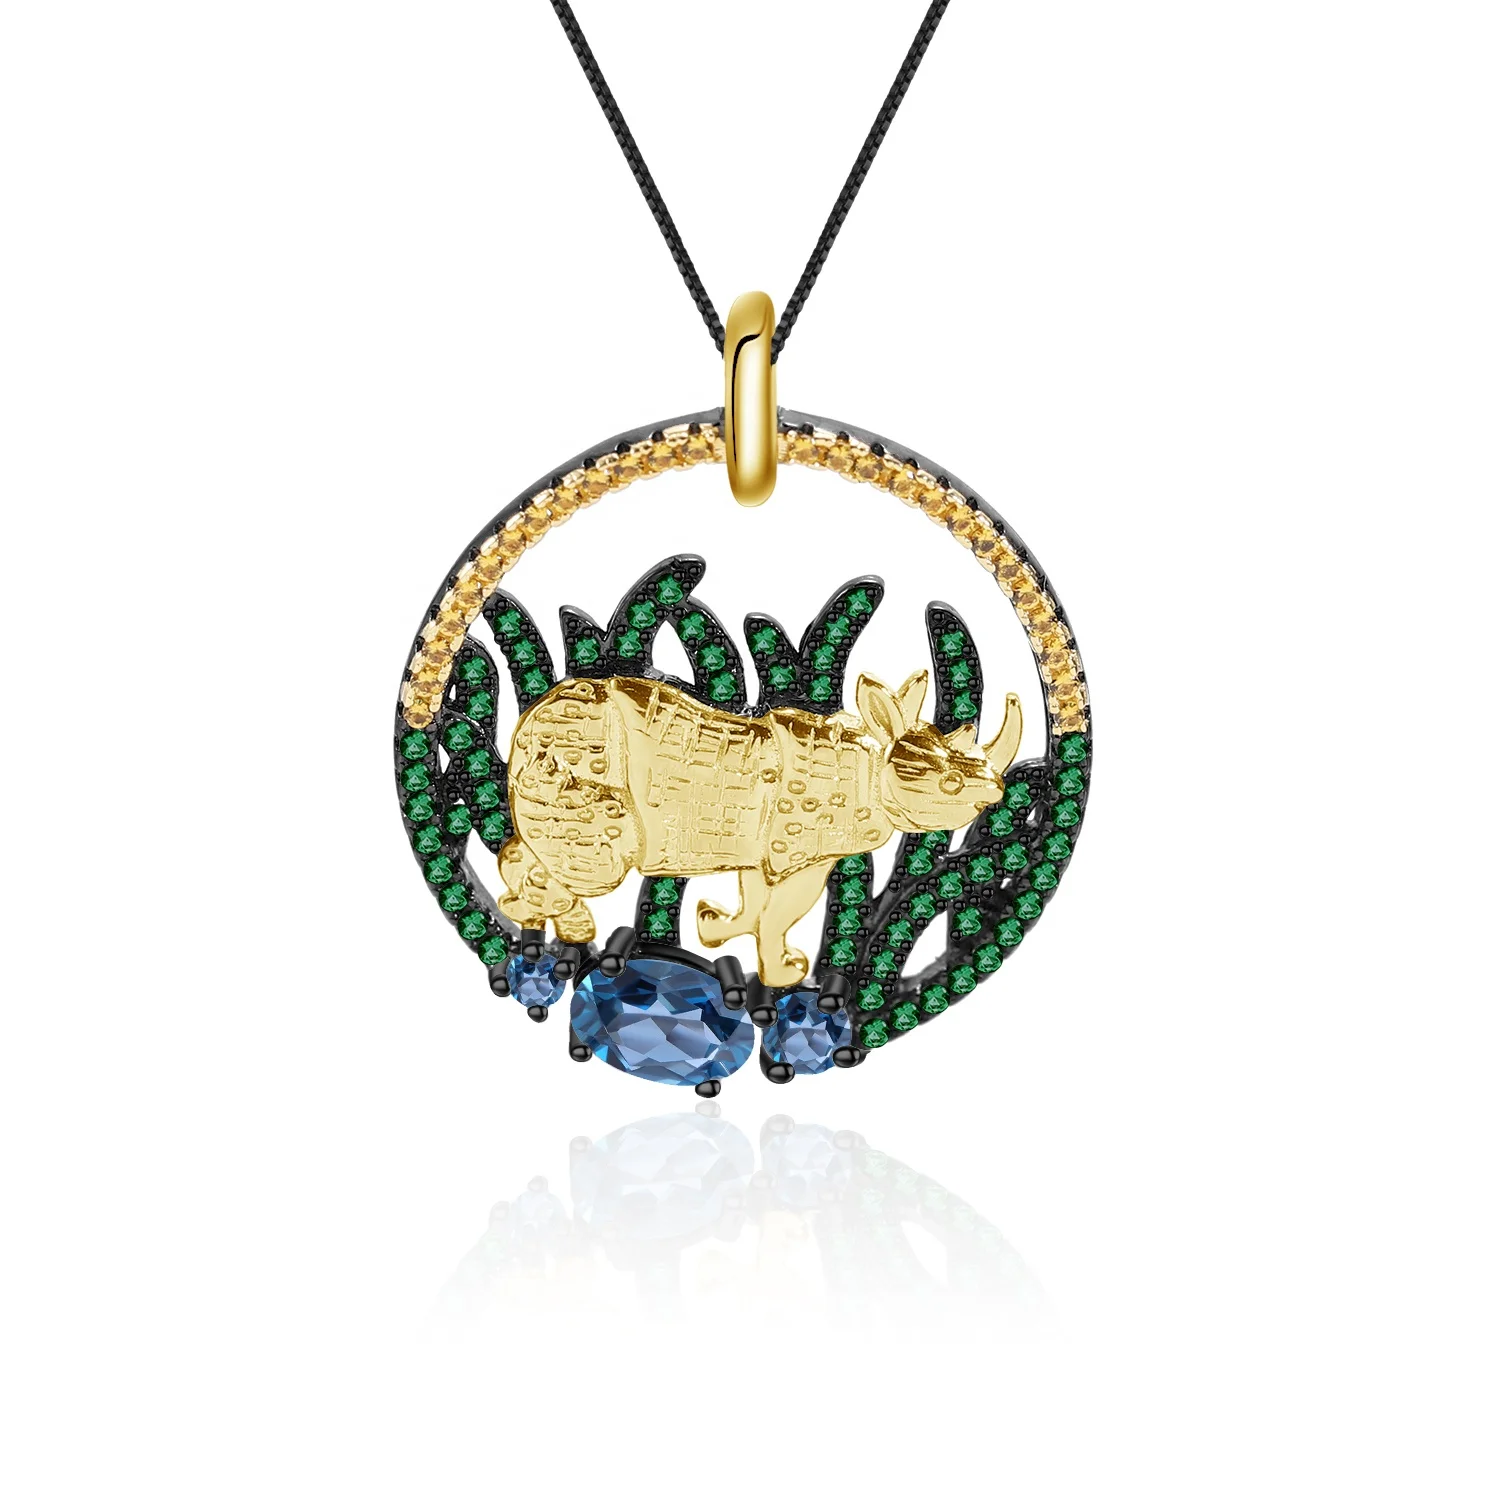 

Abiding Natural London Blue Topaz Golden Rhinoceros Pendant Handcrafted 925 Sterling Silver Fine Jewelry